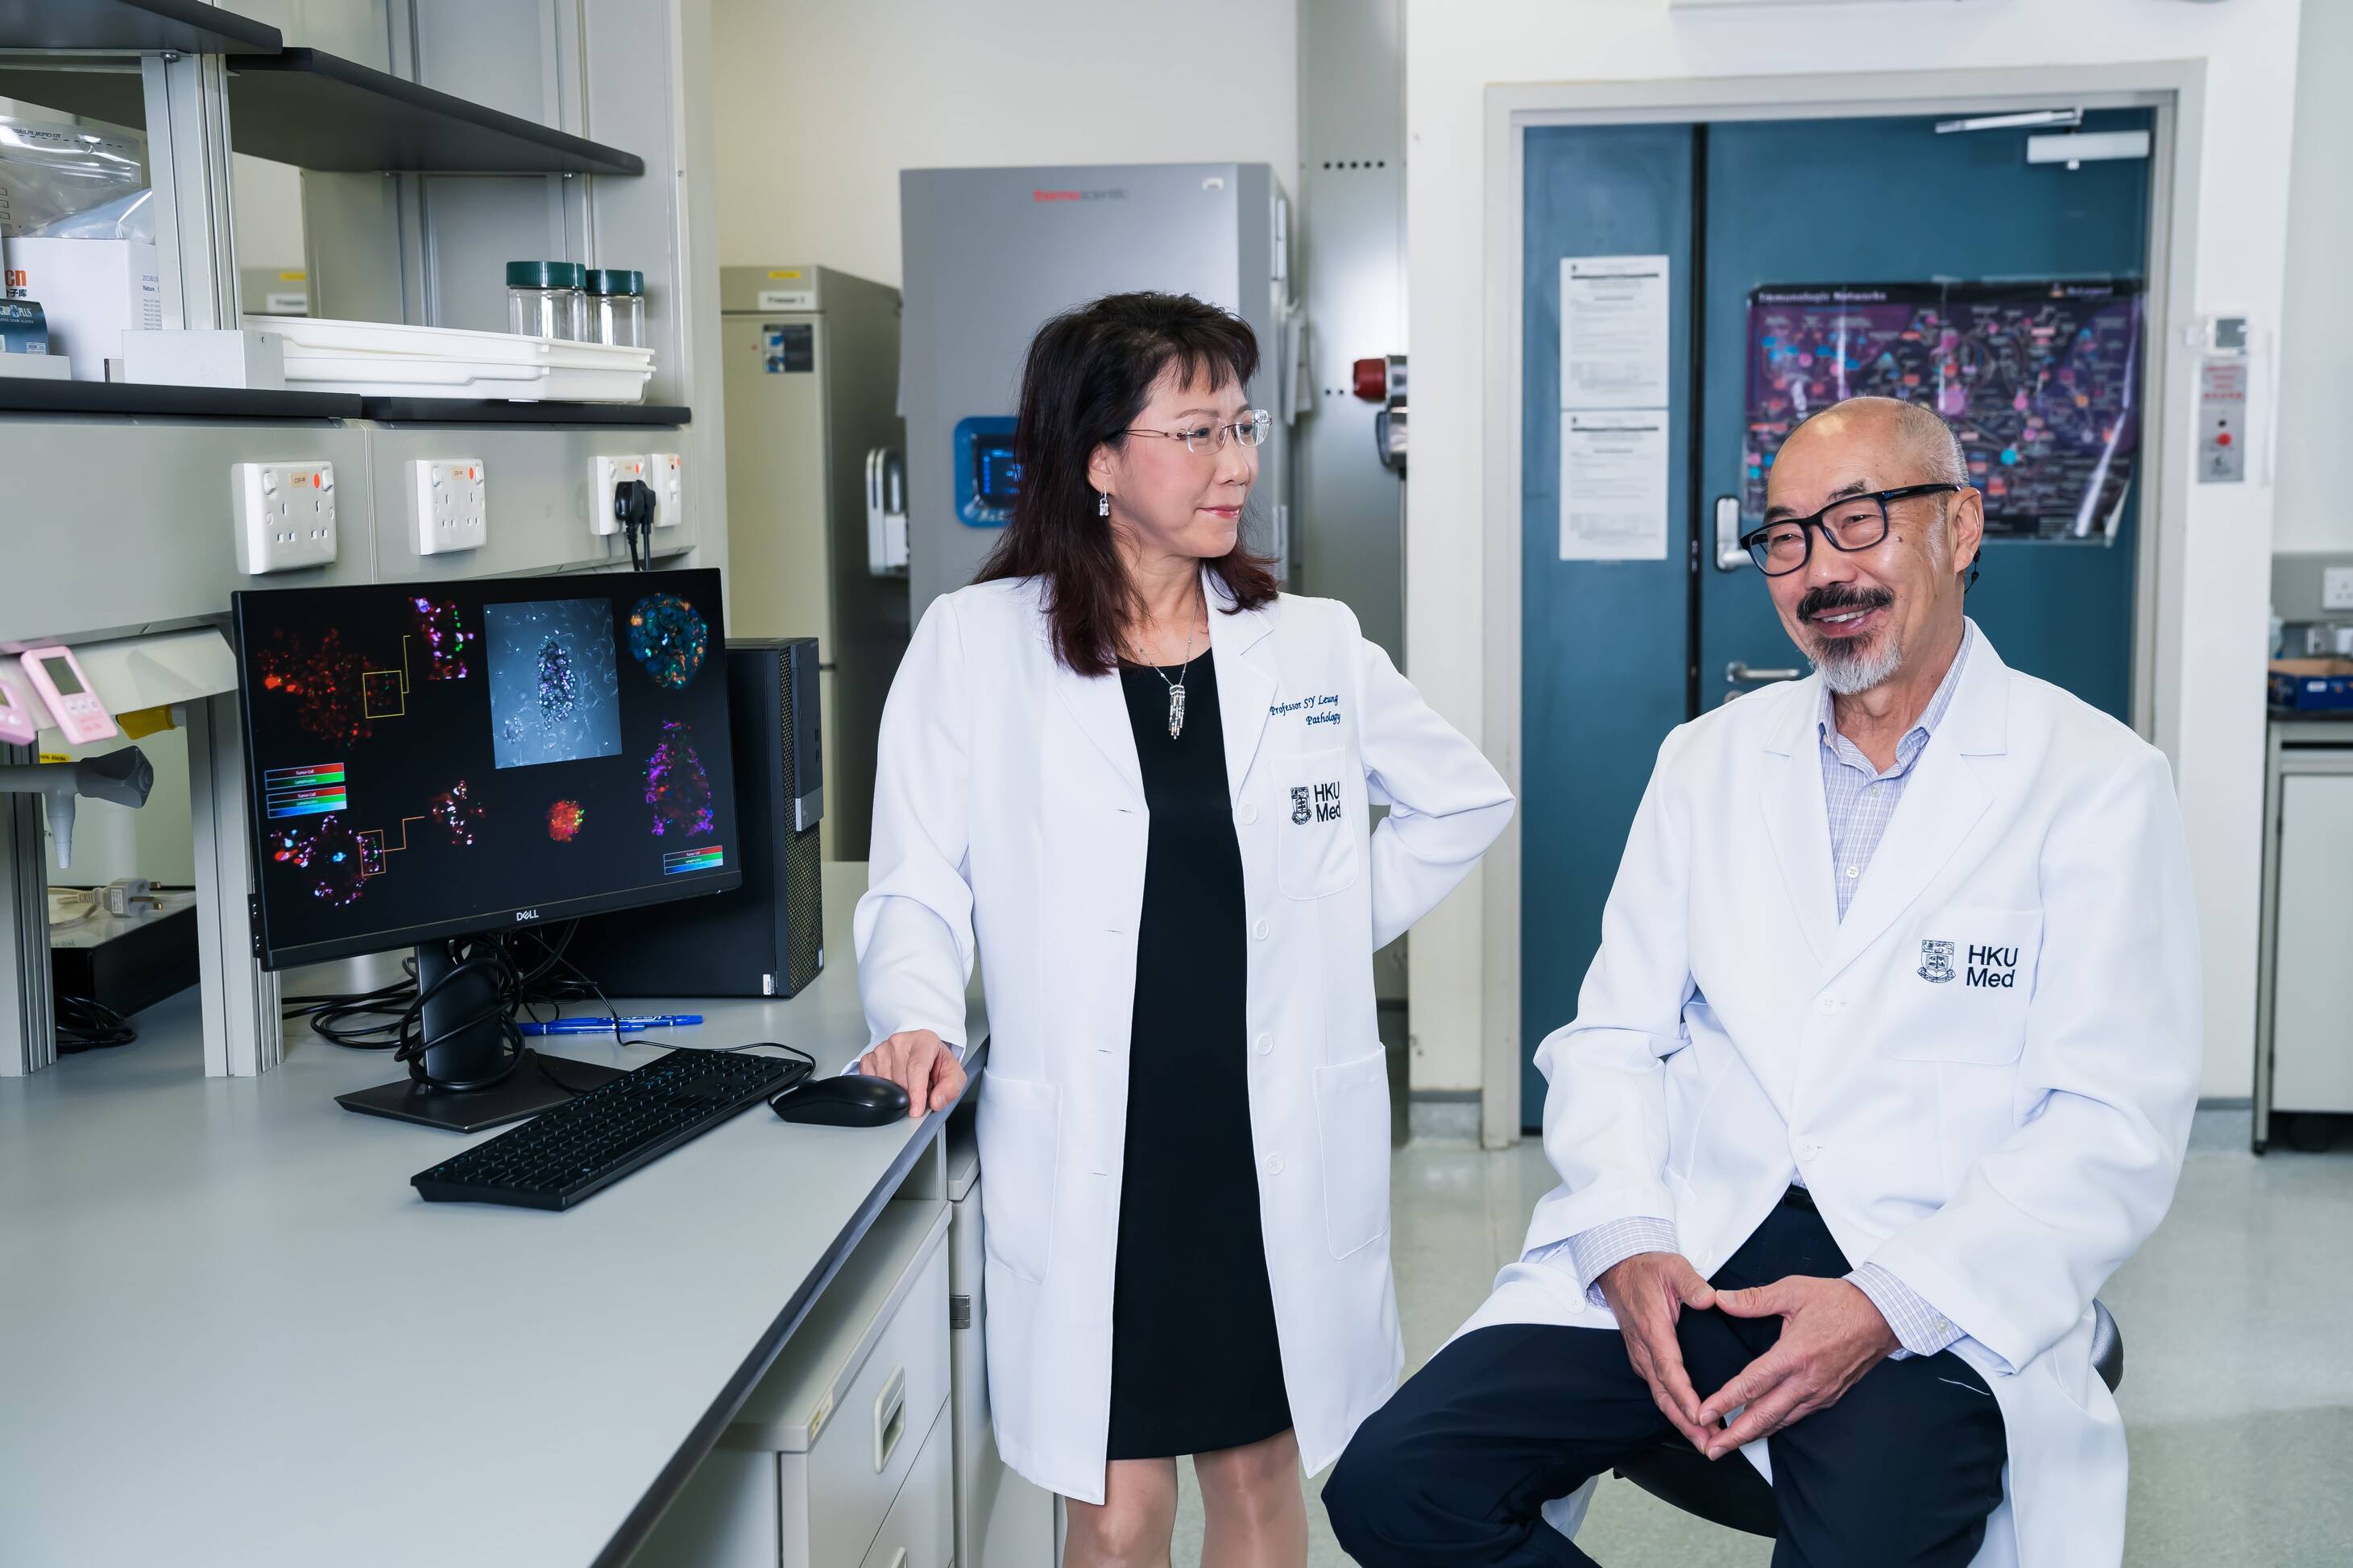 The Centre is led by Co-Directors Professor Tak Mak and Professor Suet-yi Leung in discovering novel therapeutics against hard-to-treat cancers.